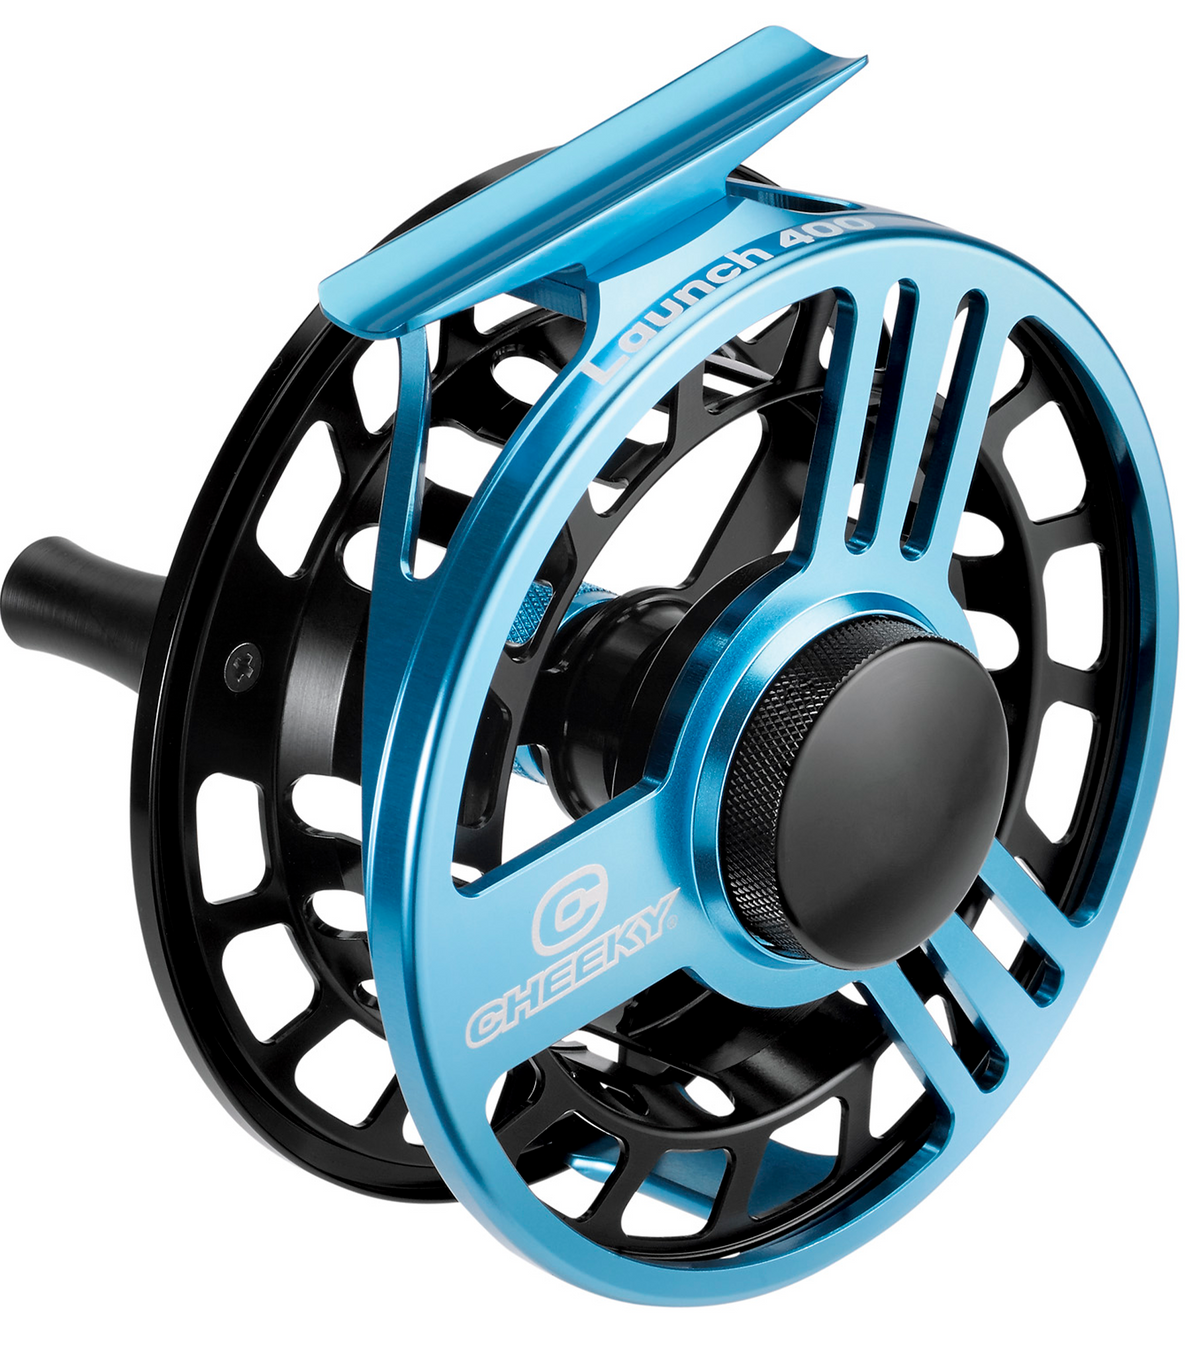 Buy Launch 400 Fly Fishing Reel online from Cheeky Fishing